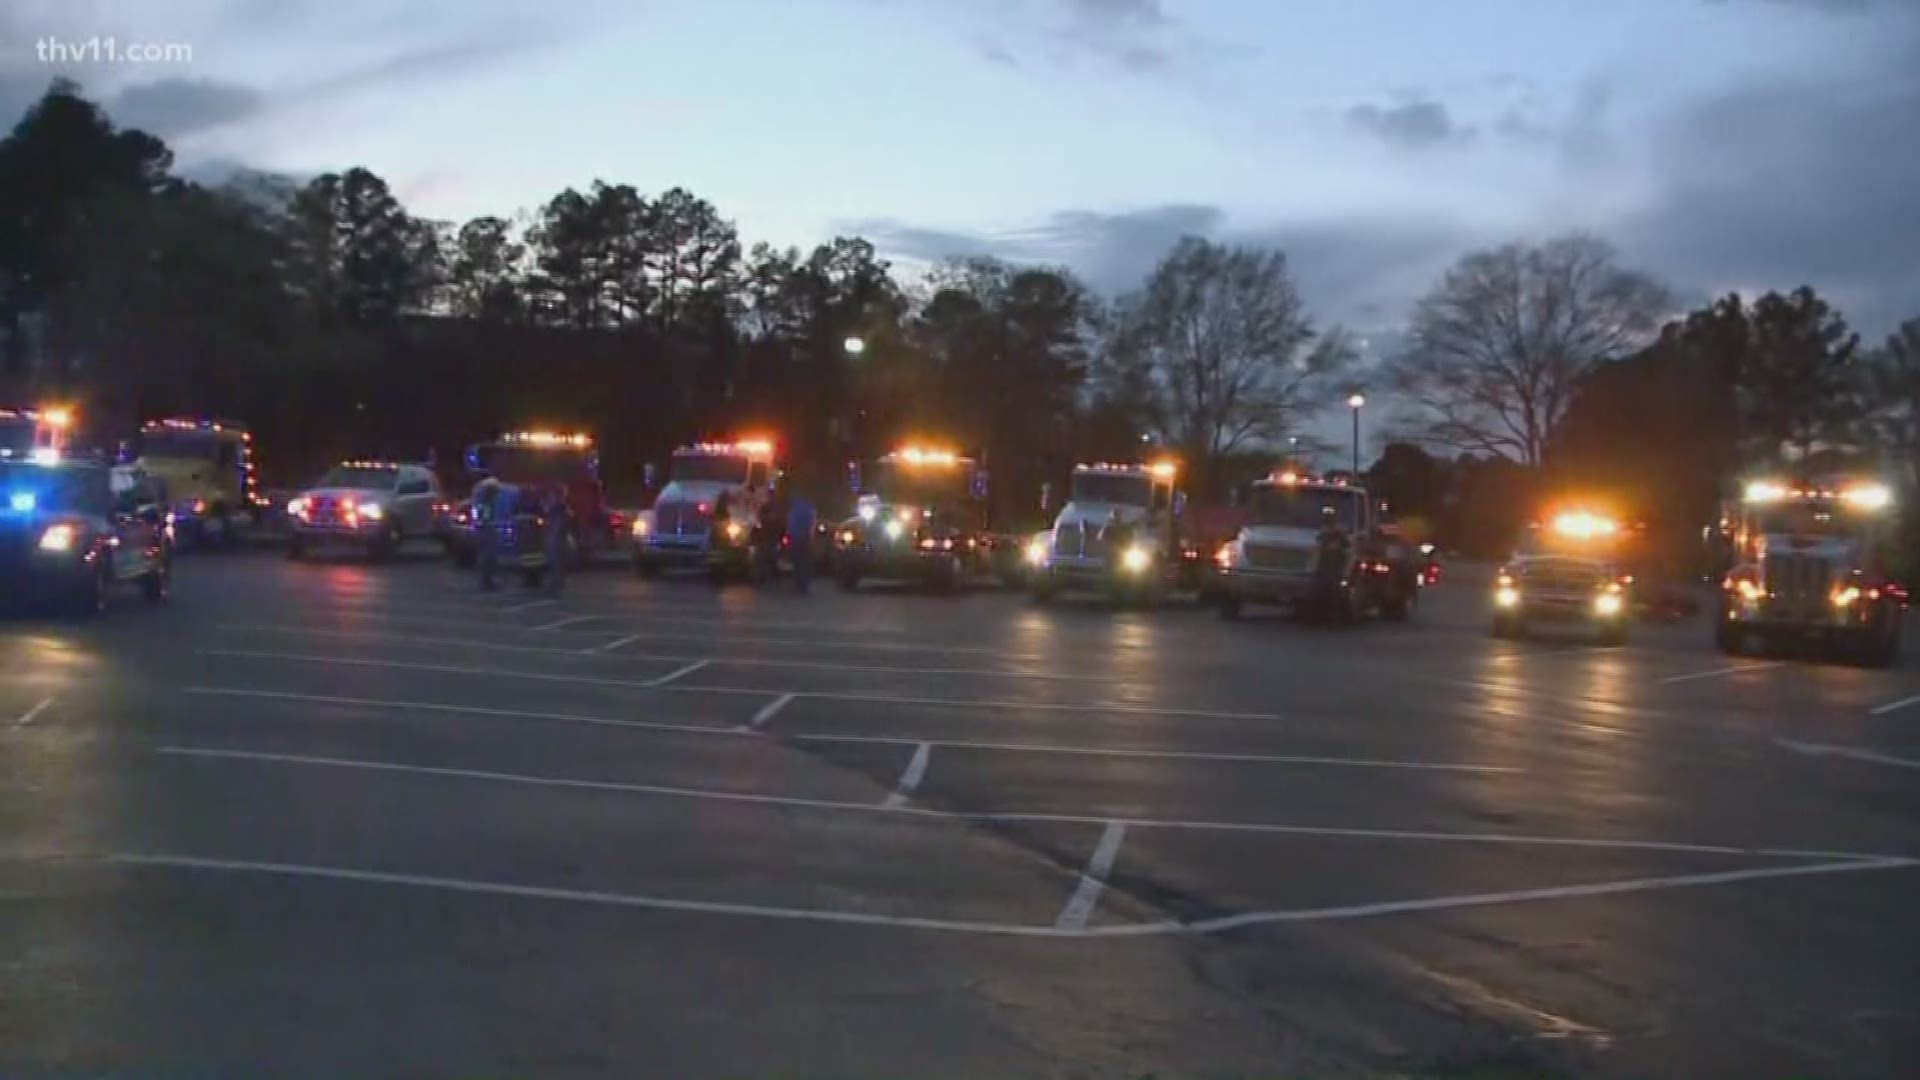 More than 30 tow truck drivers from all over Arkansas, along with law enforcement, gathered outside Baptist Hospital in Little Rock.